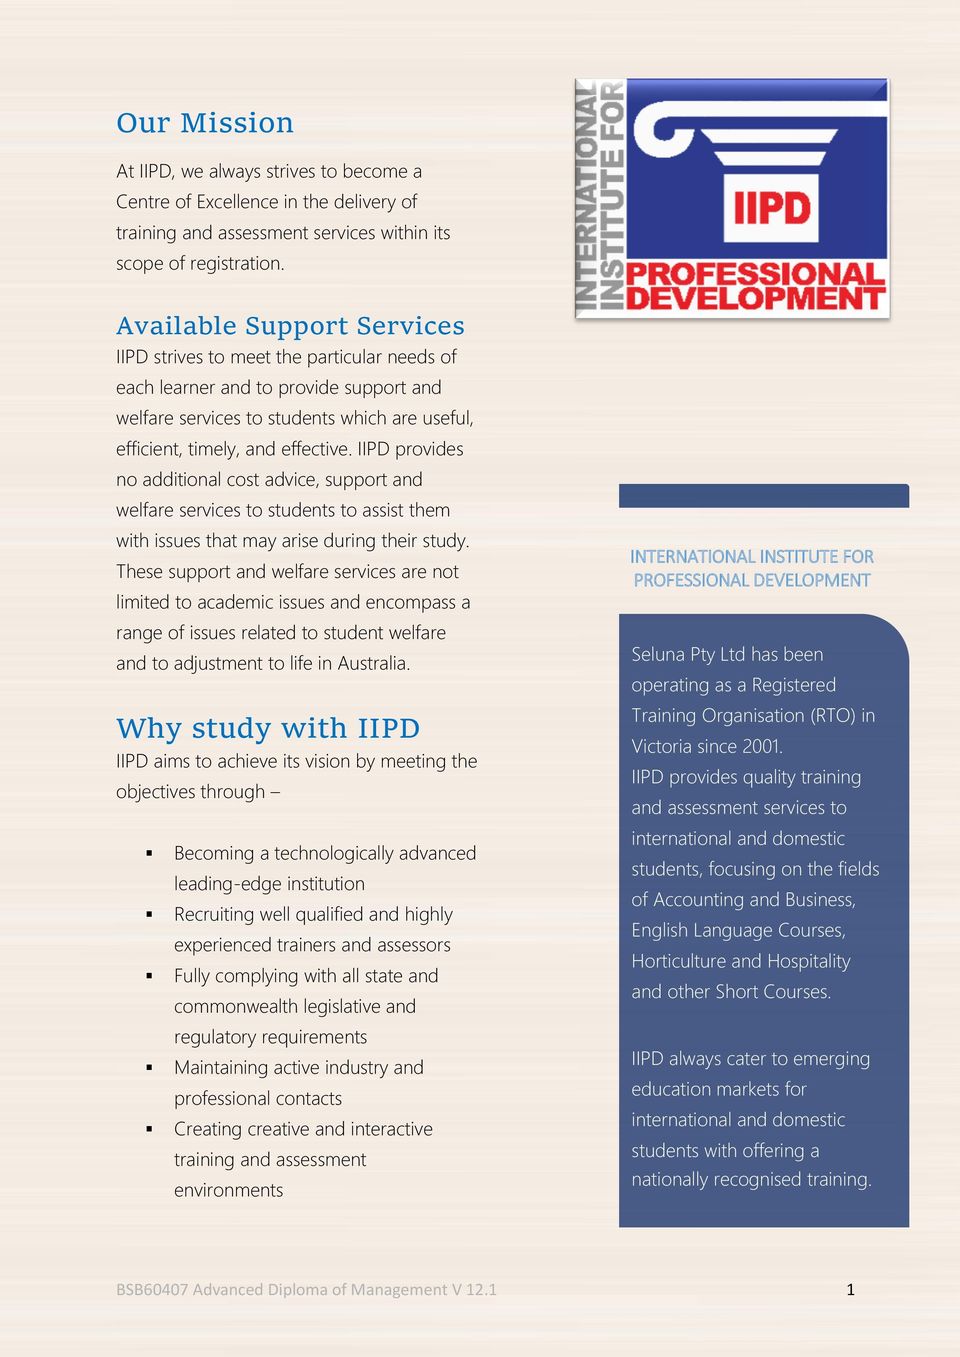 IIPD provides no additional cost advice, support and welfare services to students to assist them with issues that may arise during their study.